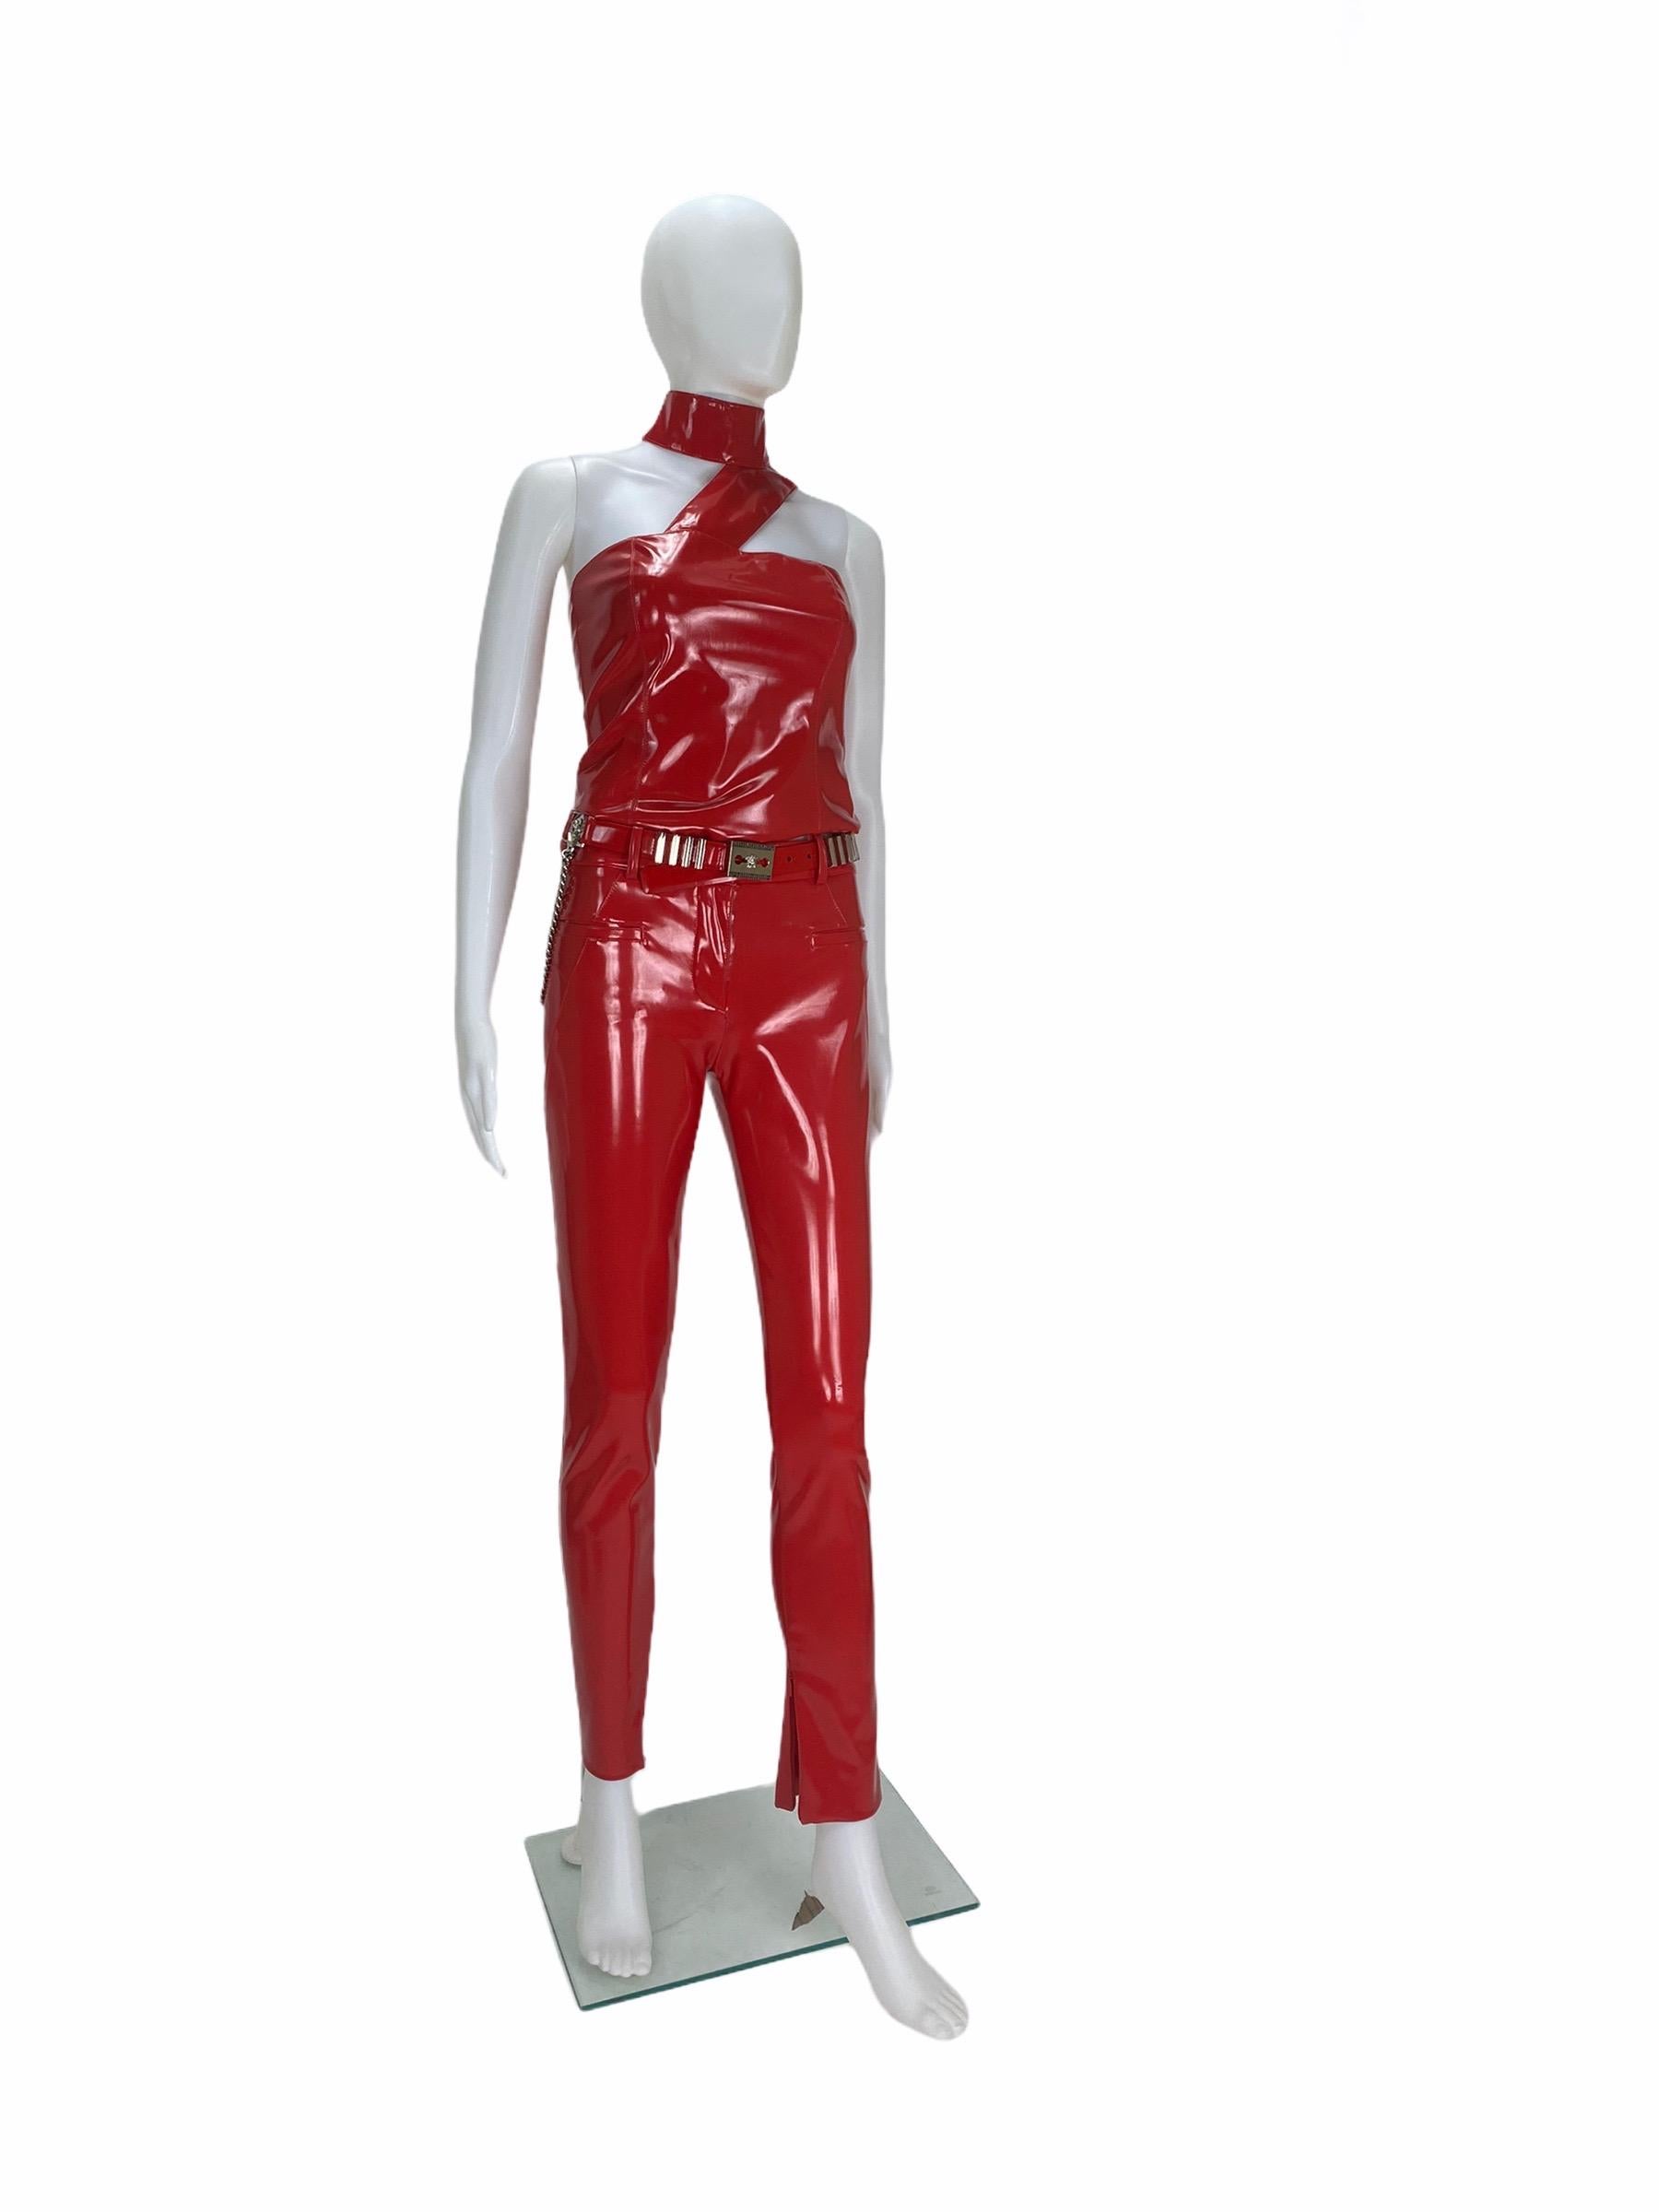 VERSACE RED JAPANESE VINYL SLIM PANTS with TOP and BELT

Fall/Winter 2013 

A striking statement set! 

IT Size 38 - US 2

The set comes with Versace signature hanger and garment bag.